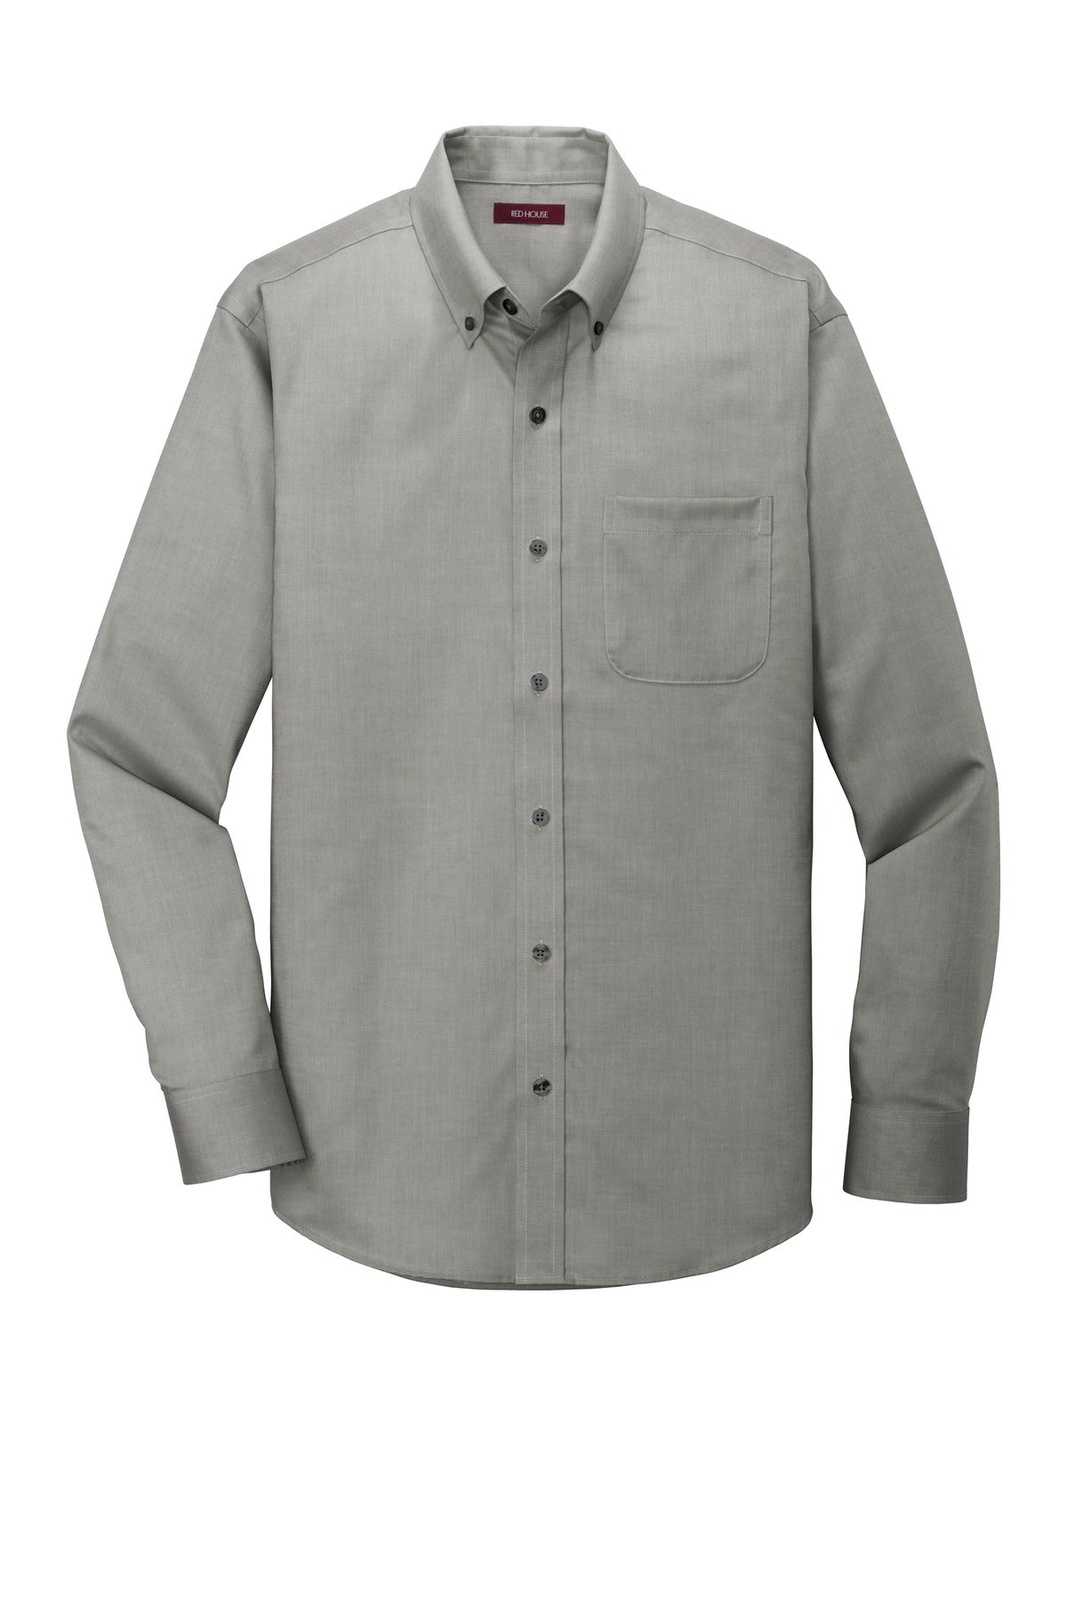 Red House TLRH240 Tall Pinpoint Oxford Non-Iron Shirt - Charcoal - HIT a Double - 5